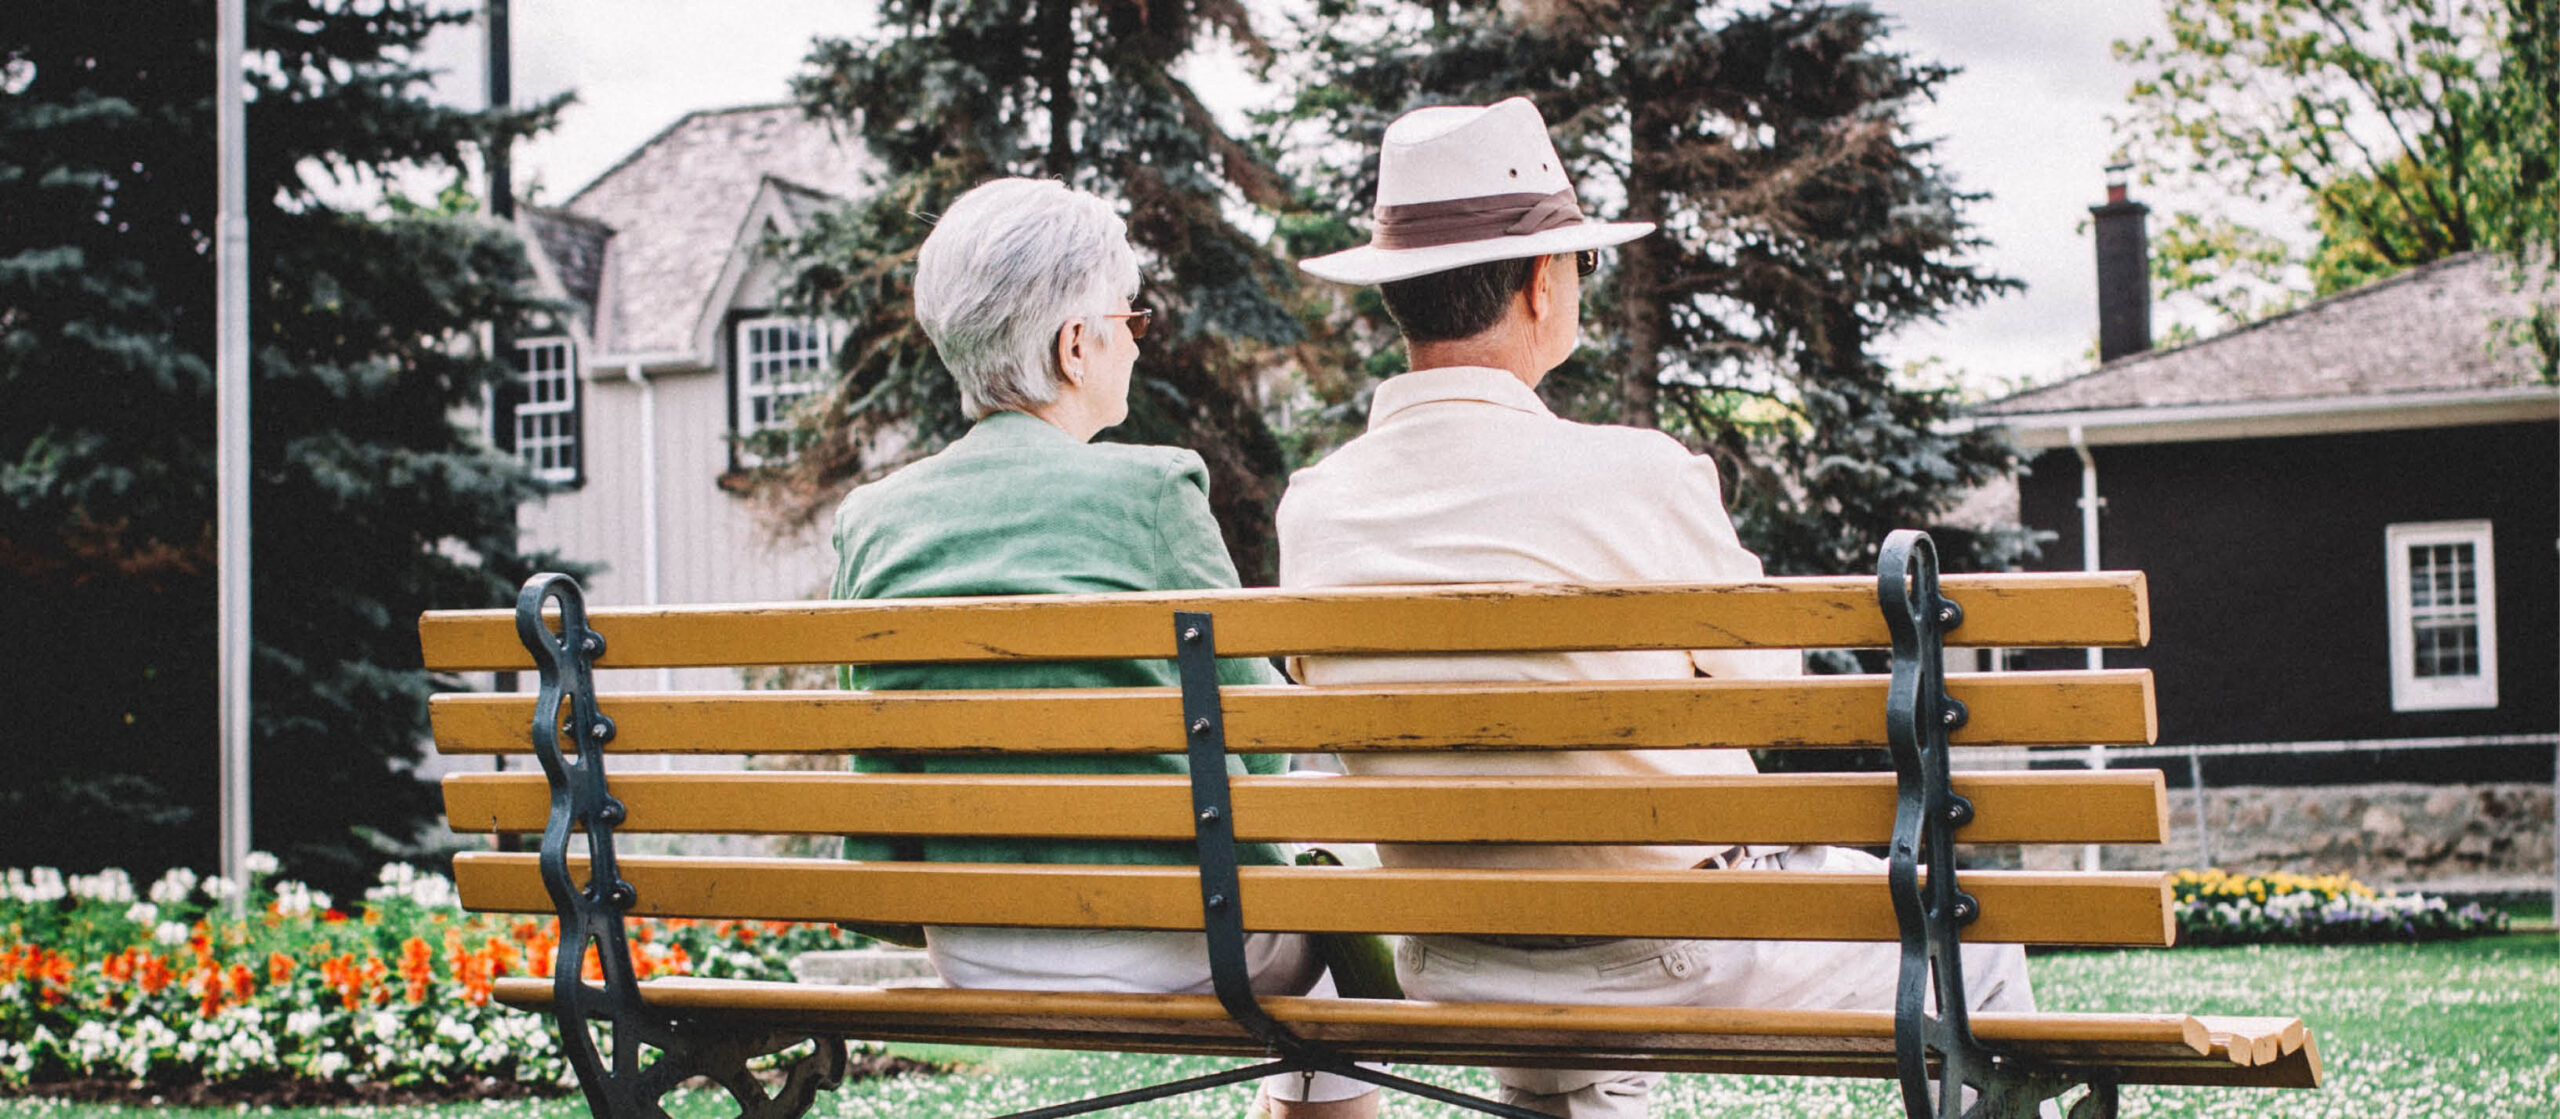 Two senior citizens sitting on a park bench